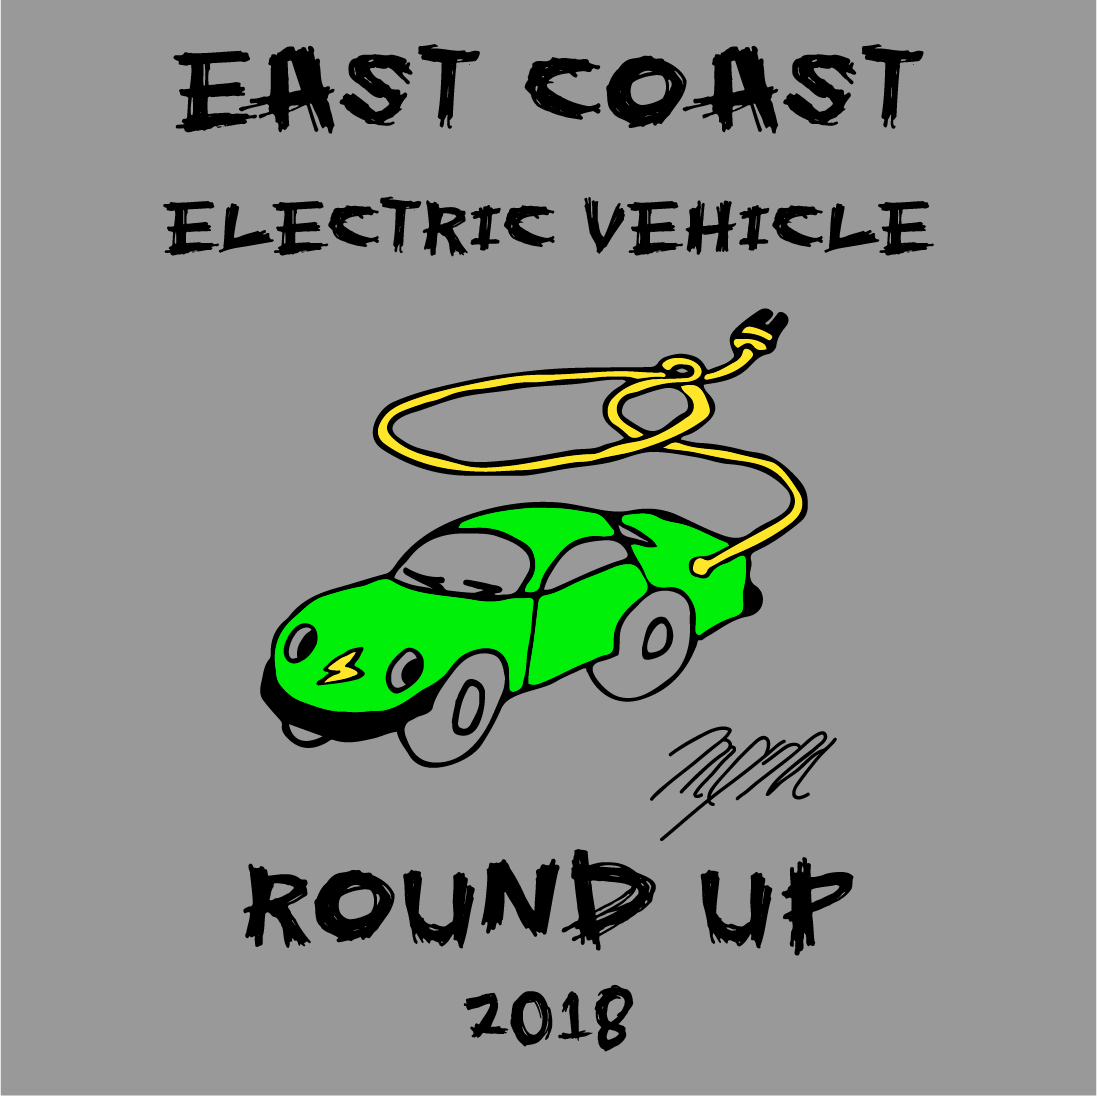 East Coast Electric Vehicle Round Up T-shirt Pre-Sale! shirt design - zoomed